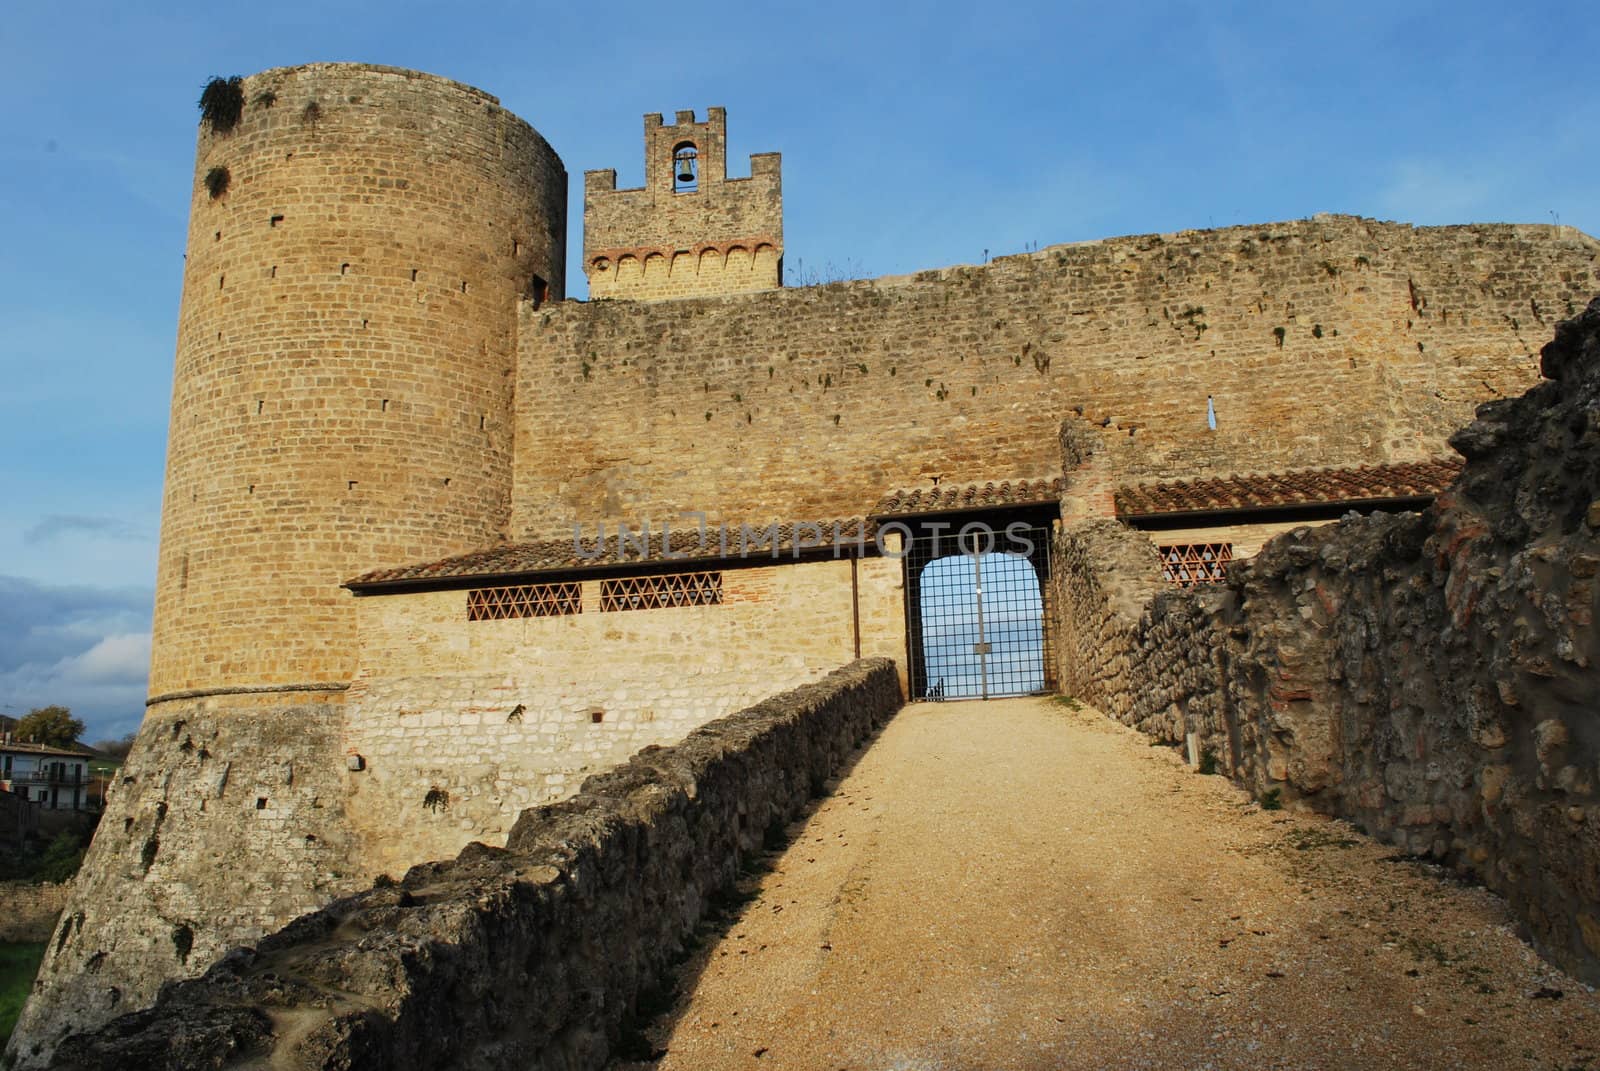 Staggia is a little town near Siena, Italy, with a beautiful medieval castle with city walls